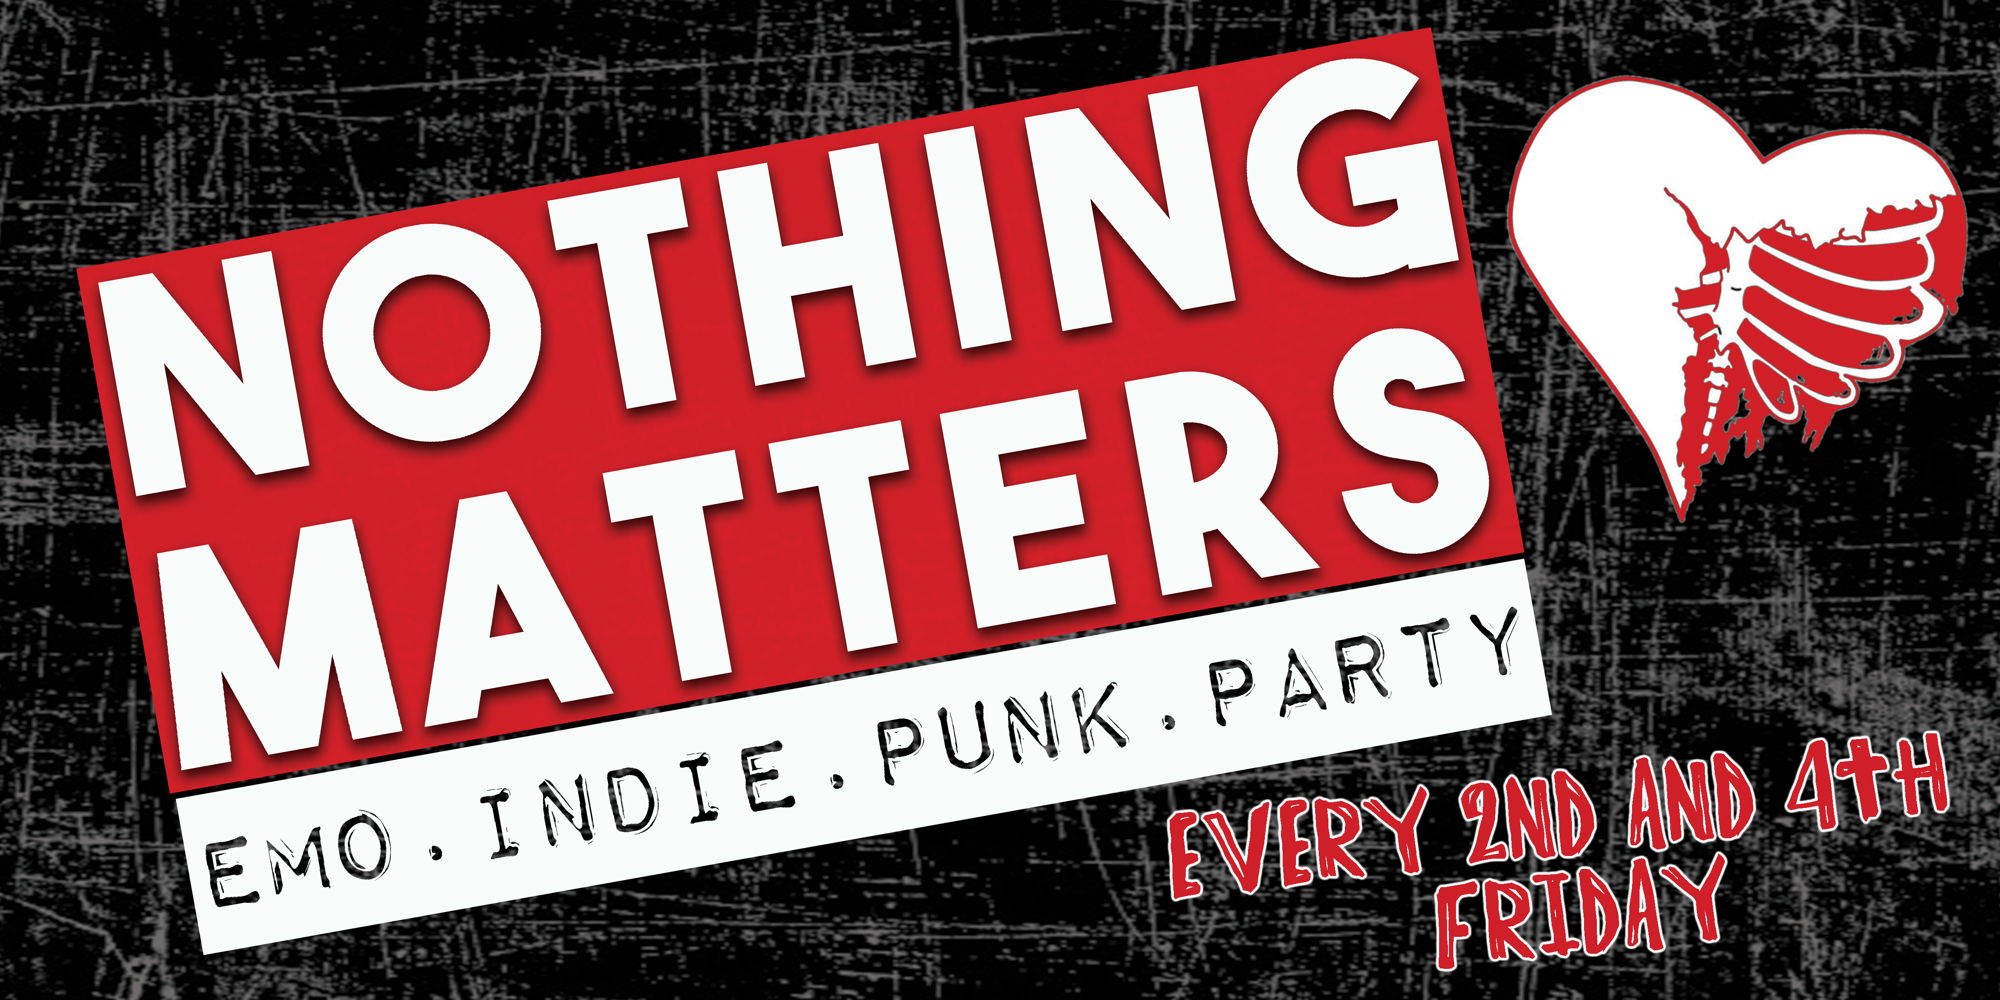 NOTHING MATTERS: EMO | INDIE | PUNK | PARTY promotional image